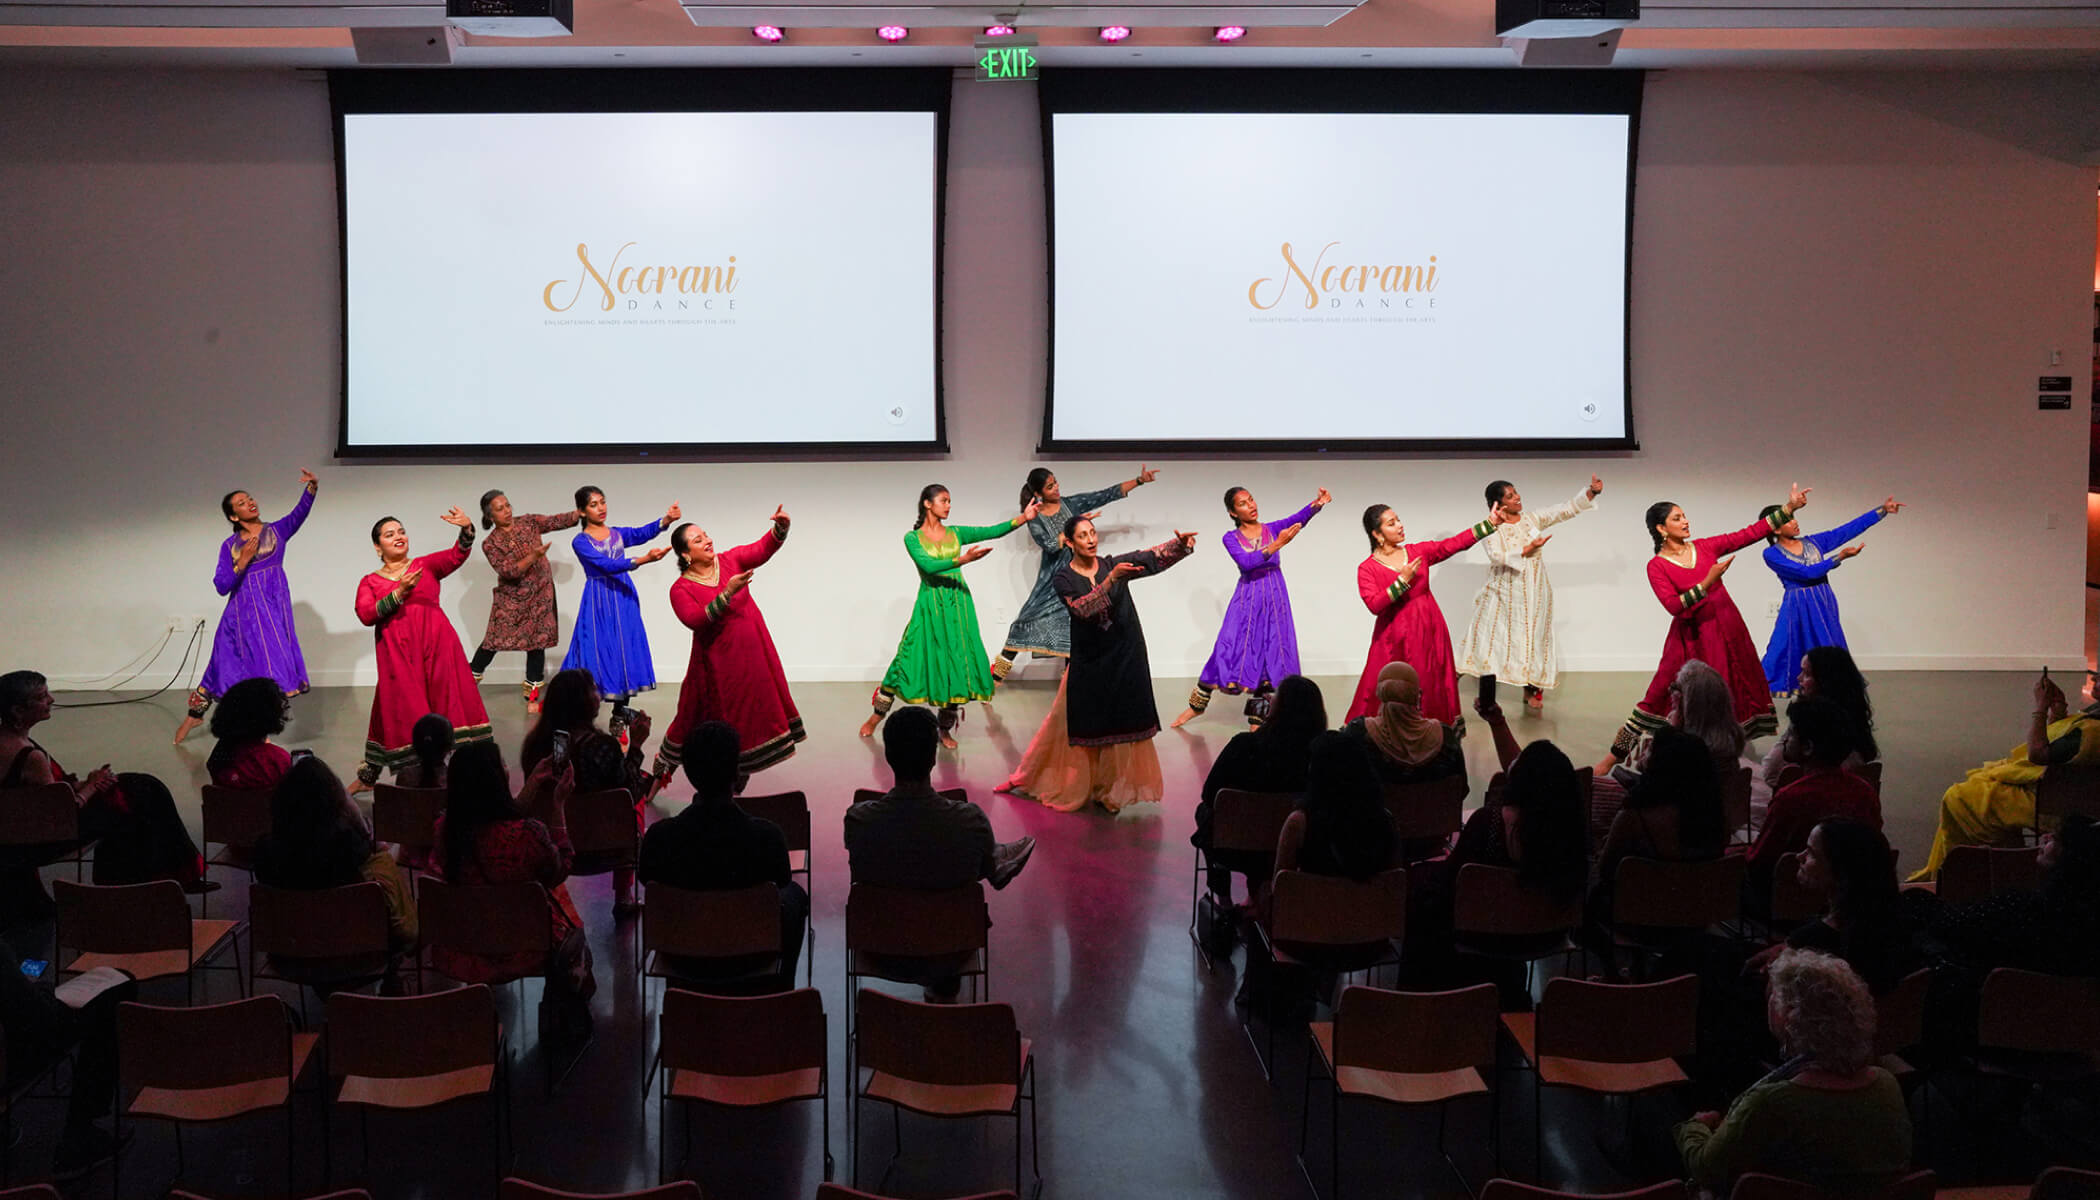 A group of women in colorful South Asian attire dance in unison in front of two screens that read “Noorani.”